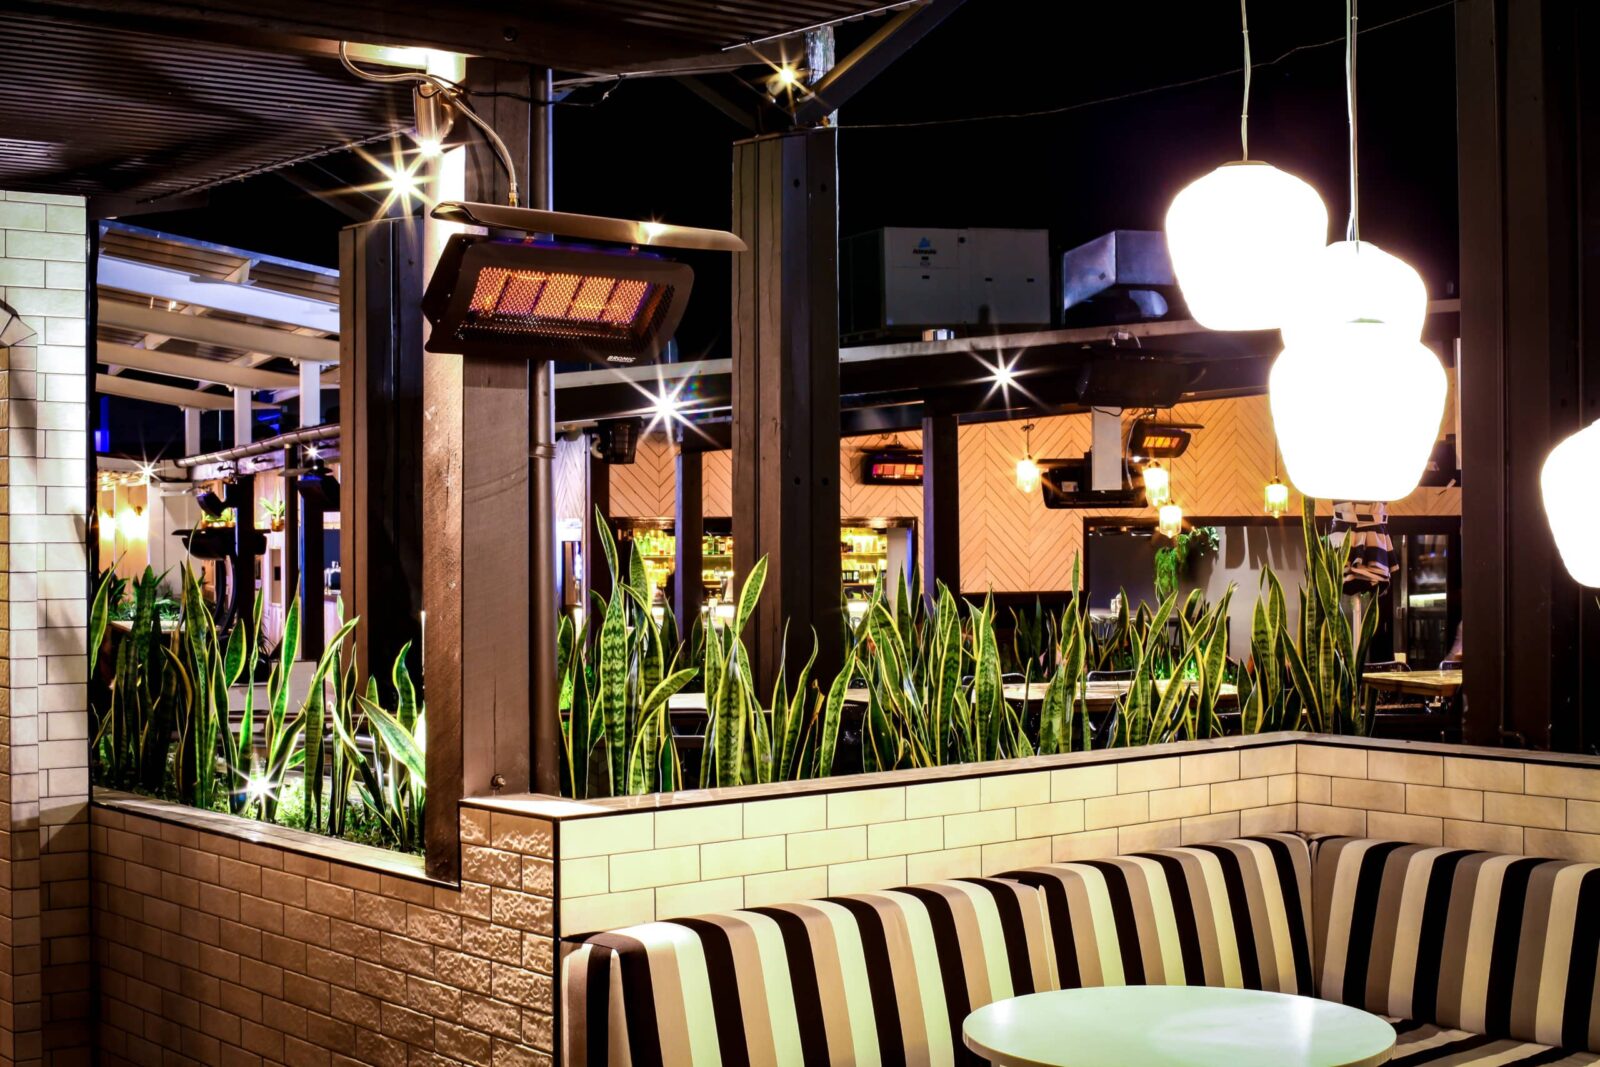 Single Booth Seating in Restaurant with decorative plant life and lighting